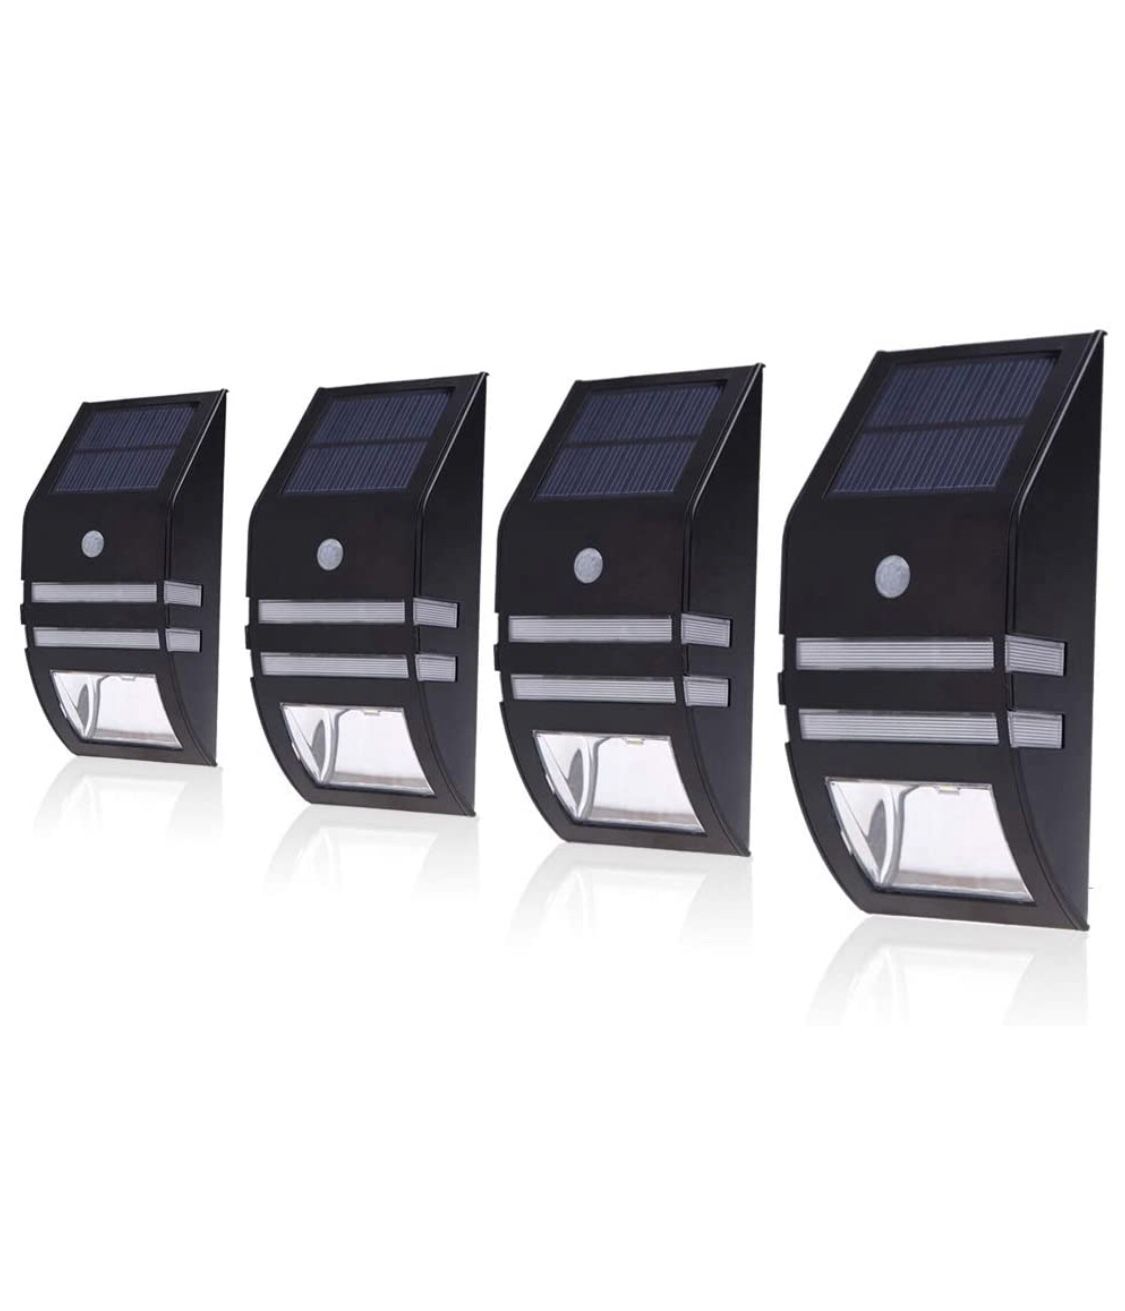 4 Pack Solar Powered LED Accent/Security Light Black